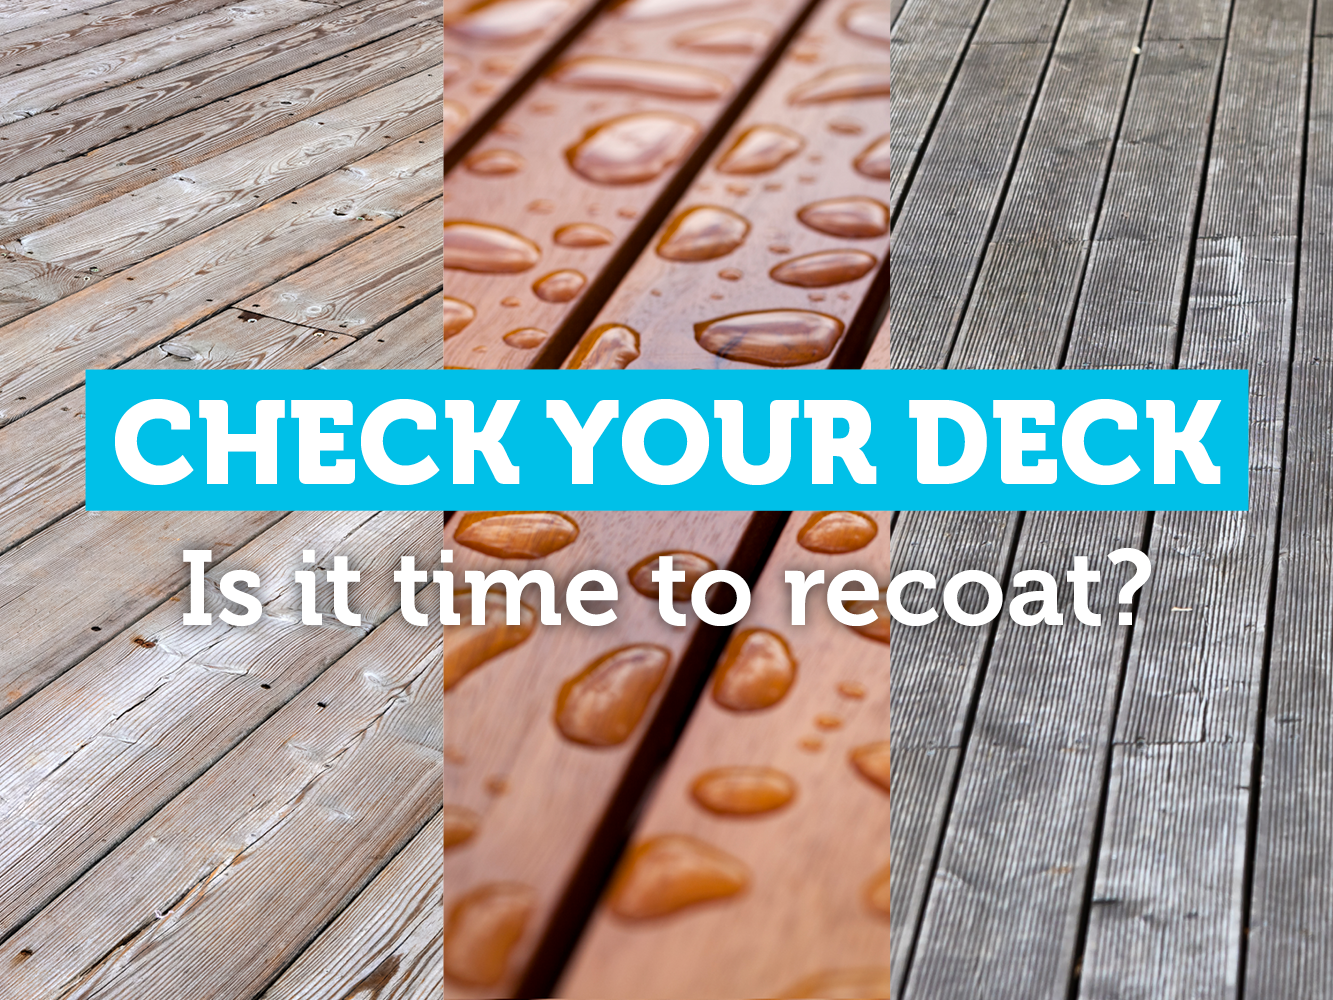 Check your Deck: Is it time for a refresh?